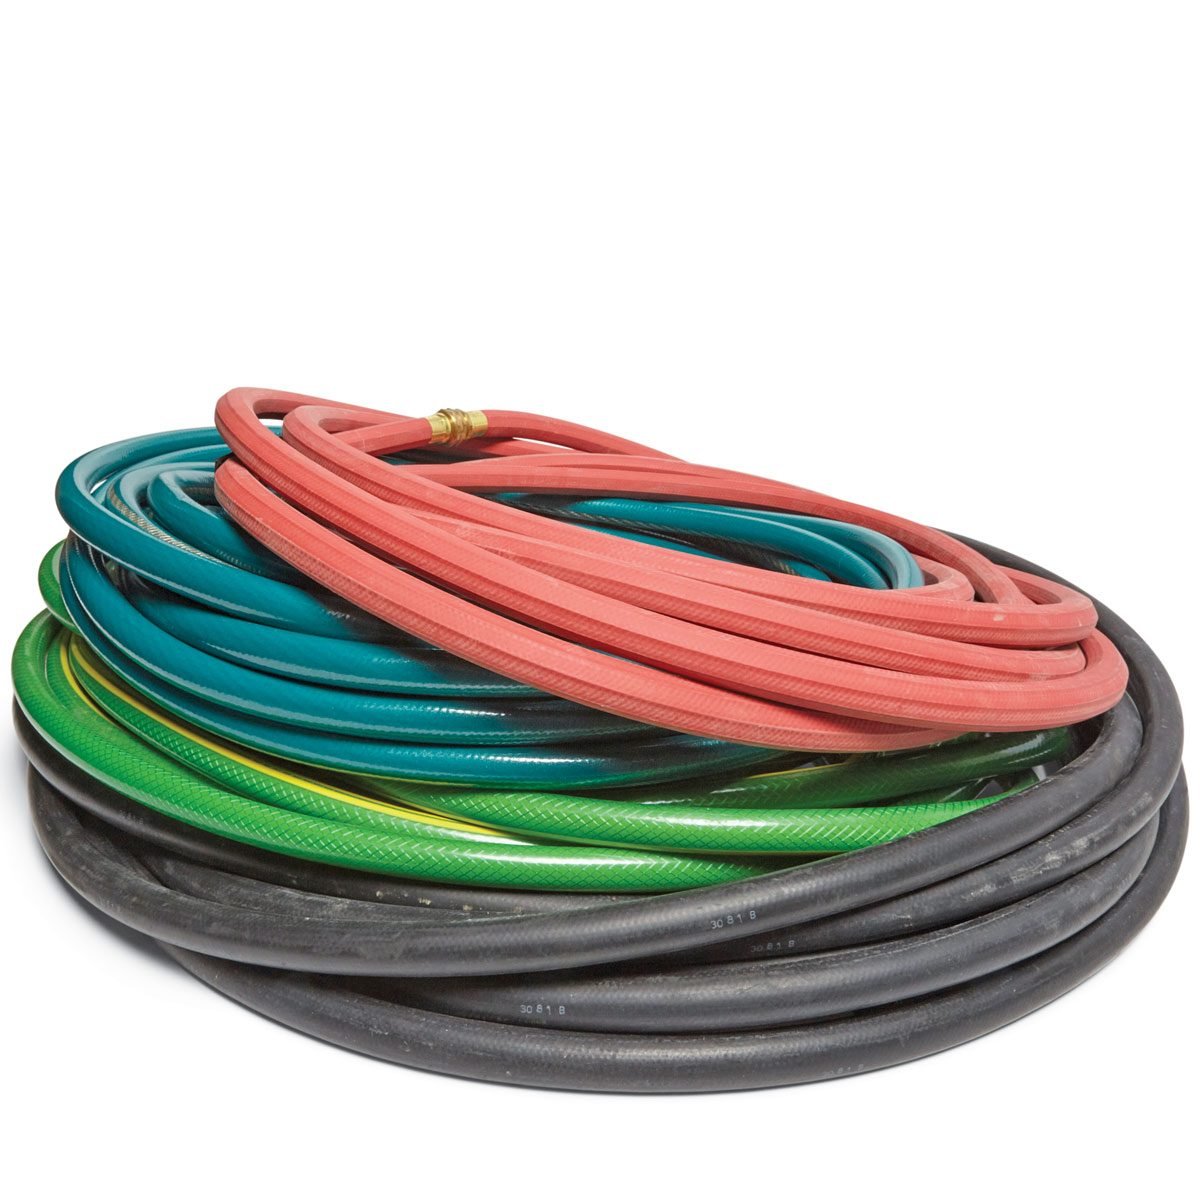 Drain Garden Hoses or Waste Money on Replacements